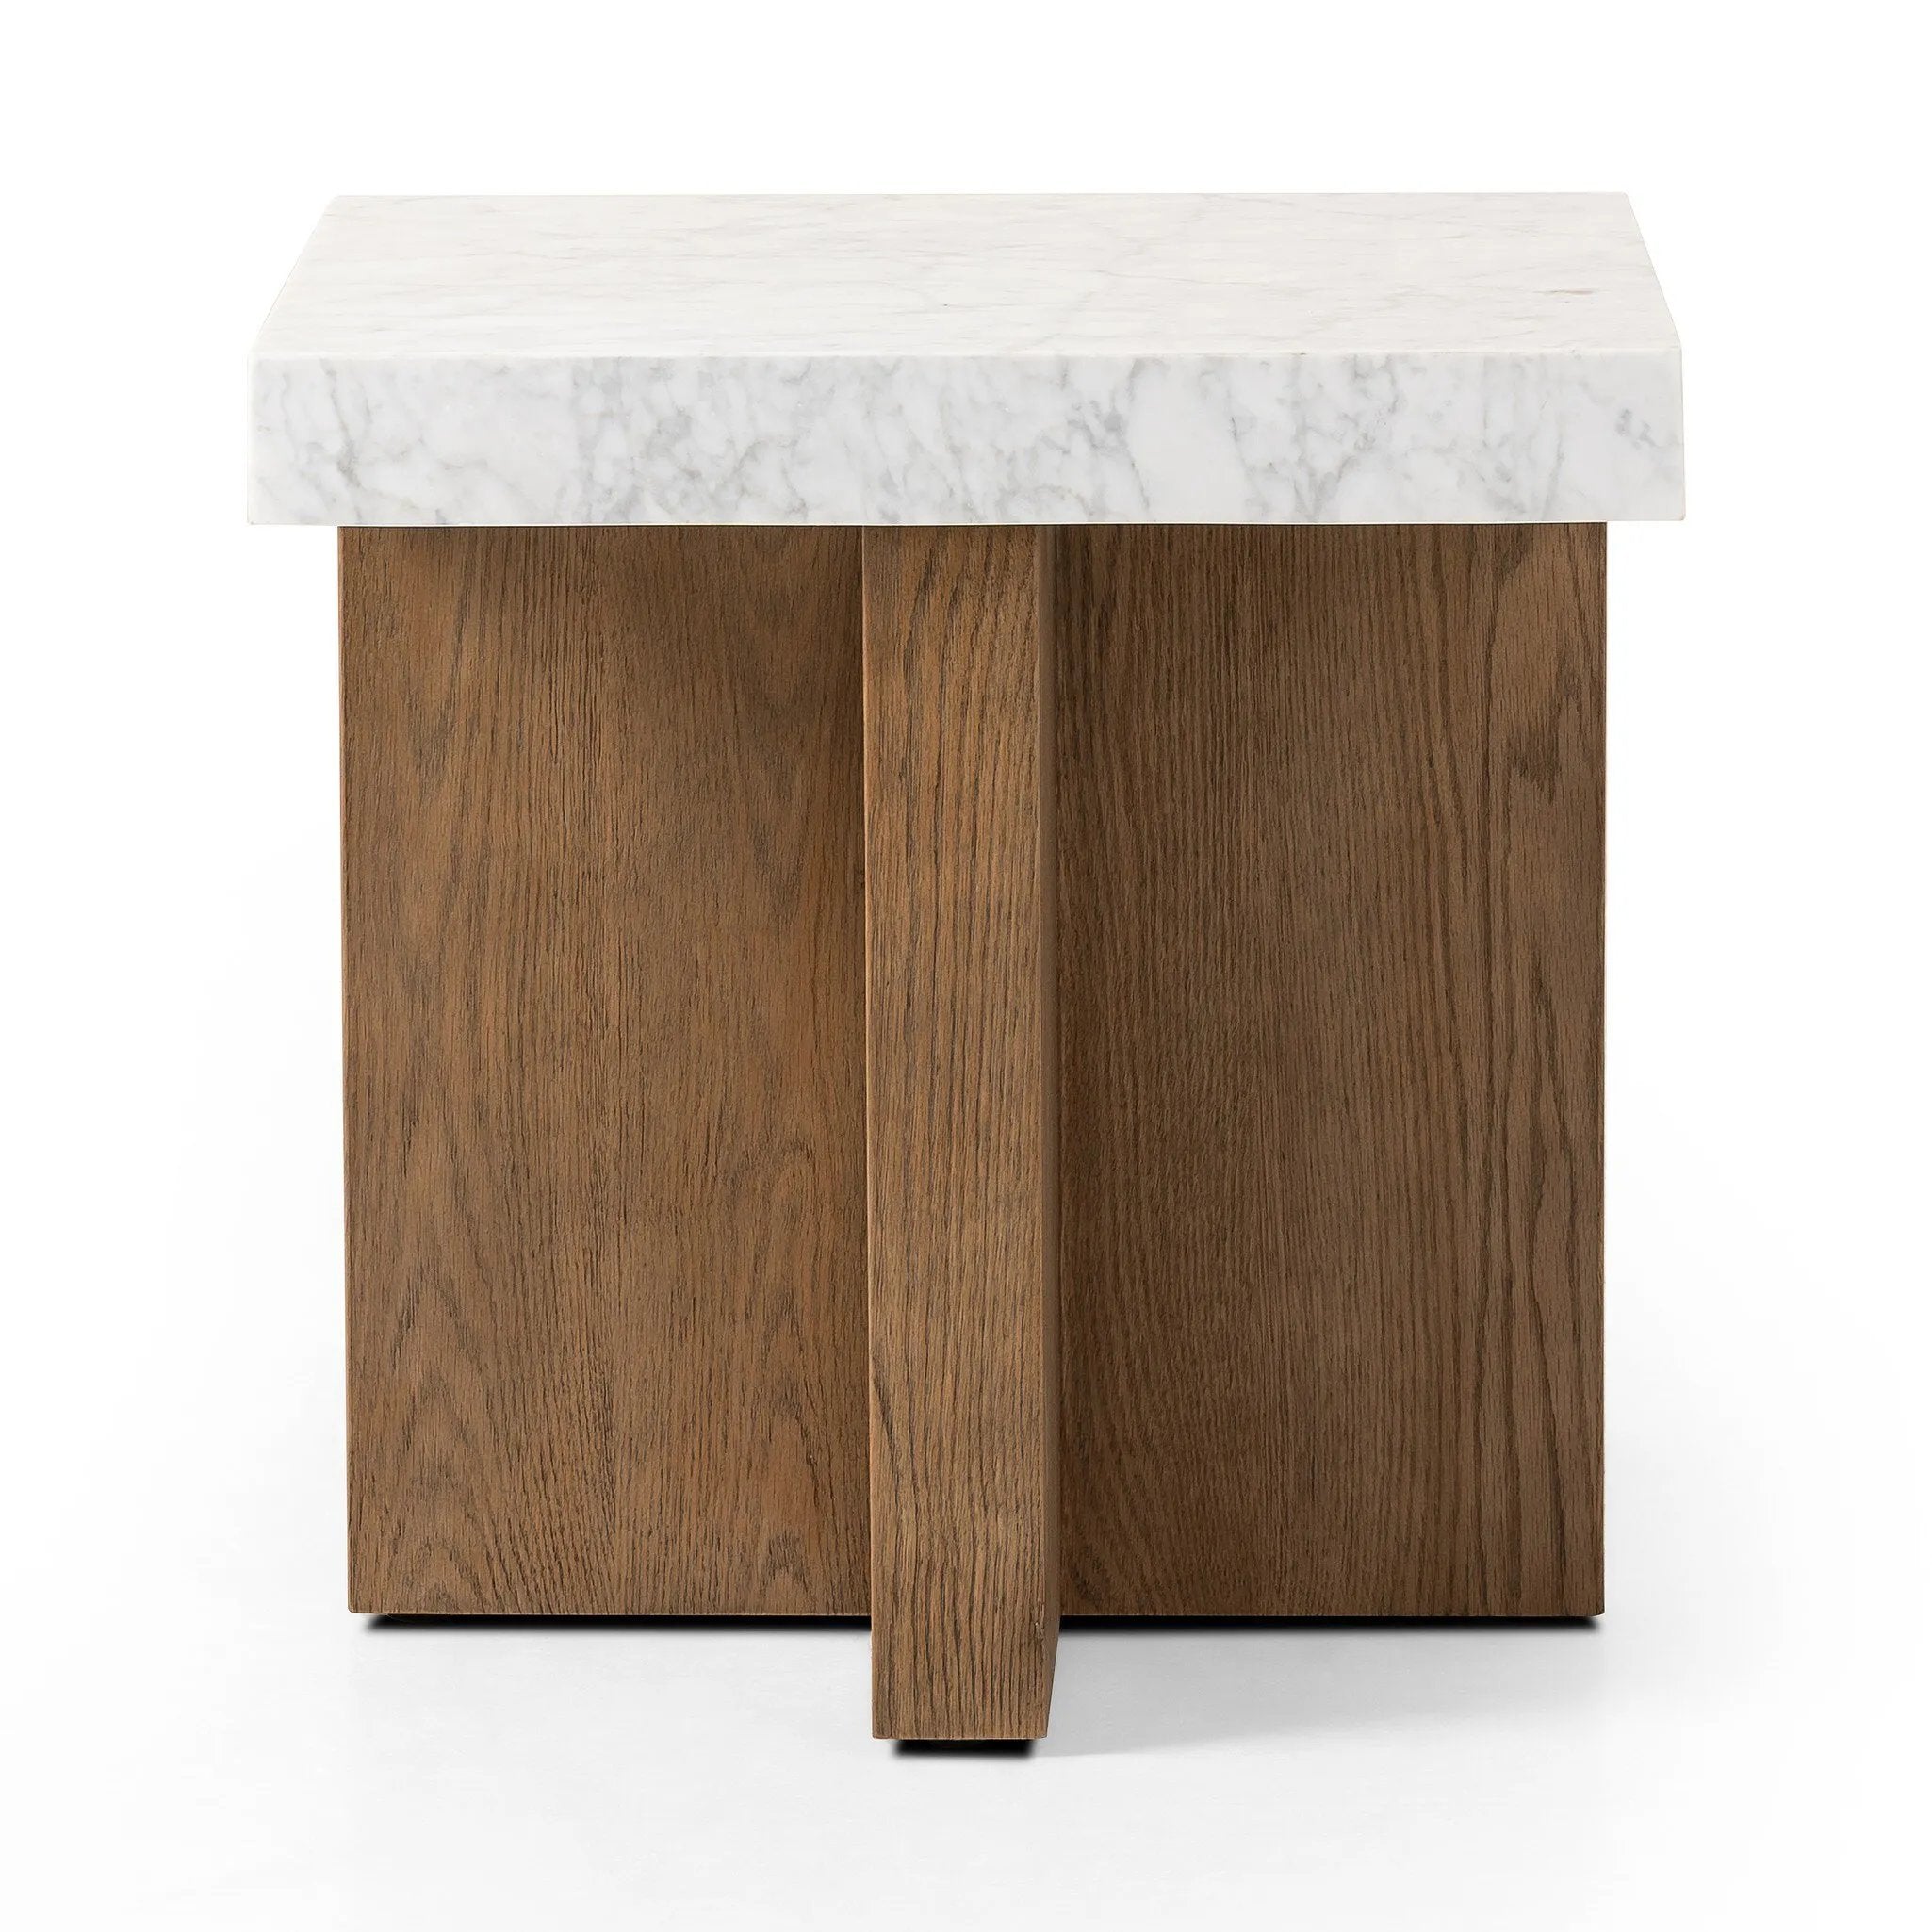 Structured lines and chunky proportions fuse for a mixed material end table of smoked oak and polished marble.Collection: Hughe Amethyst Home provides interior design, new home construction design consulting, vintage area rugs, and lighting in the Charlotte metro area.